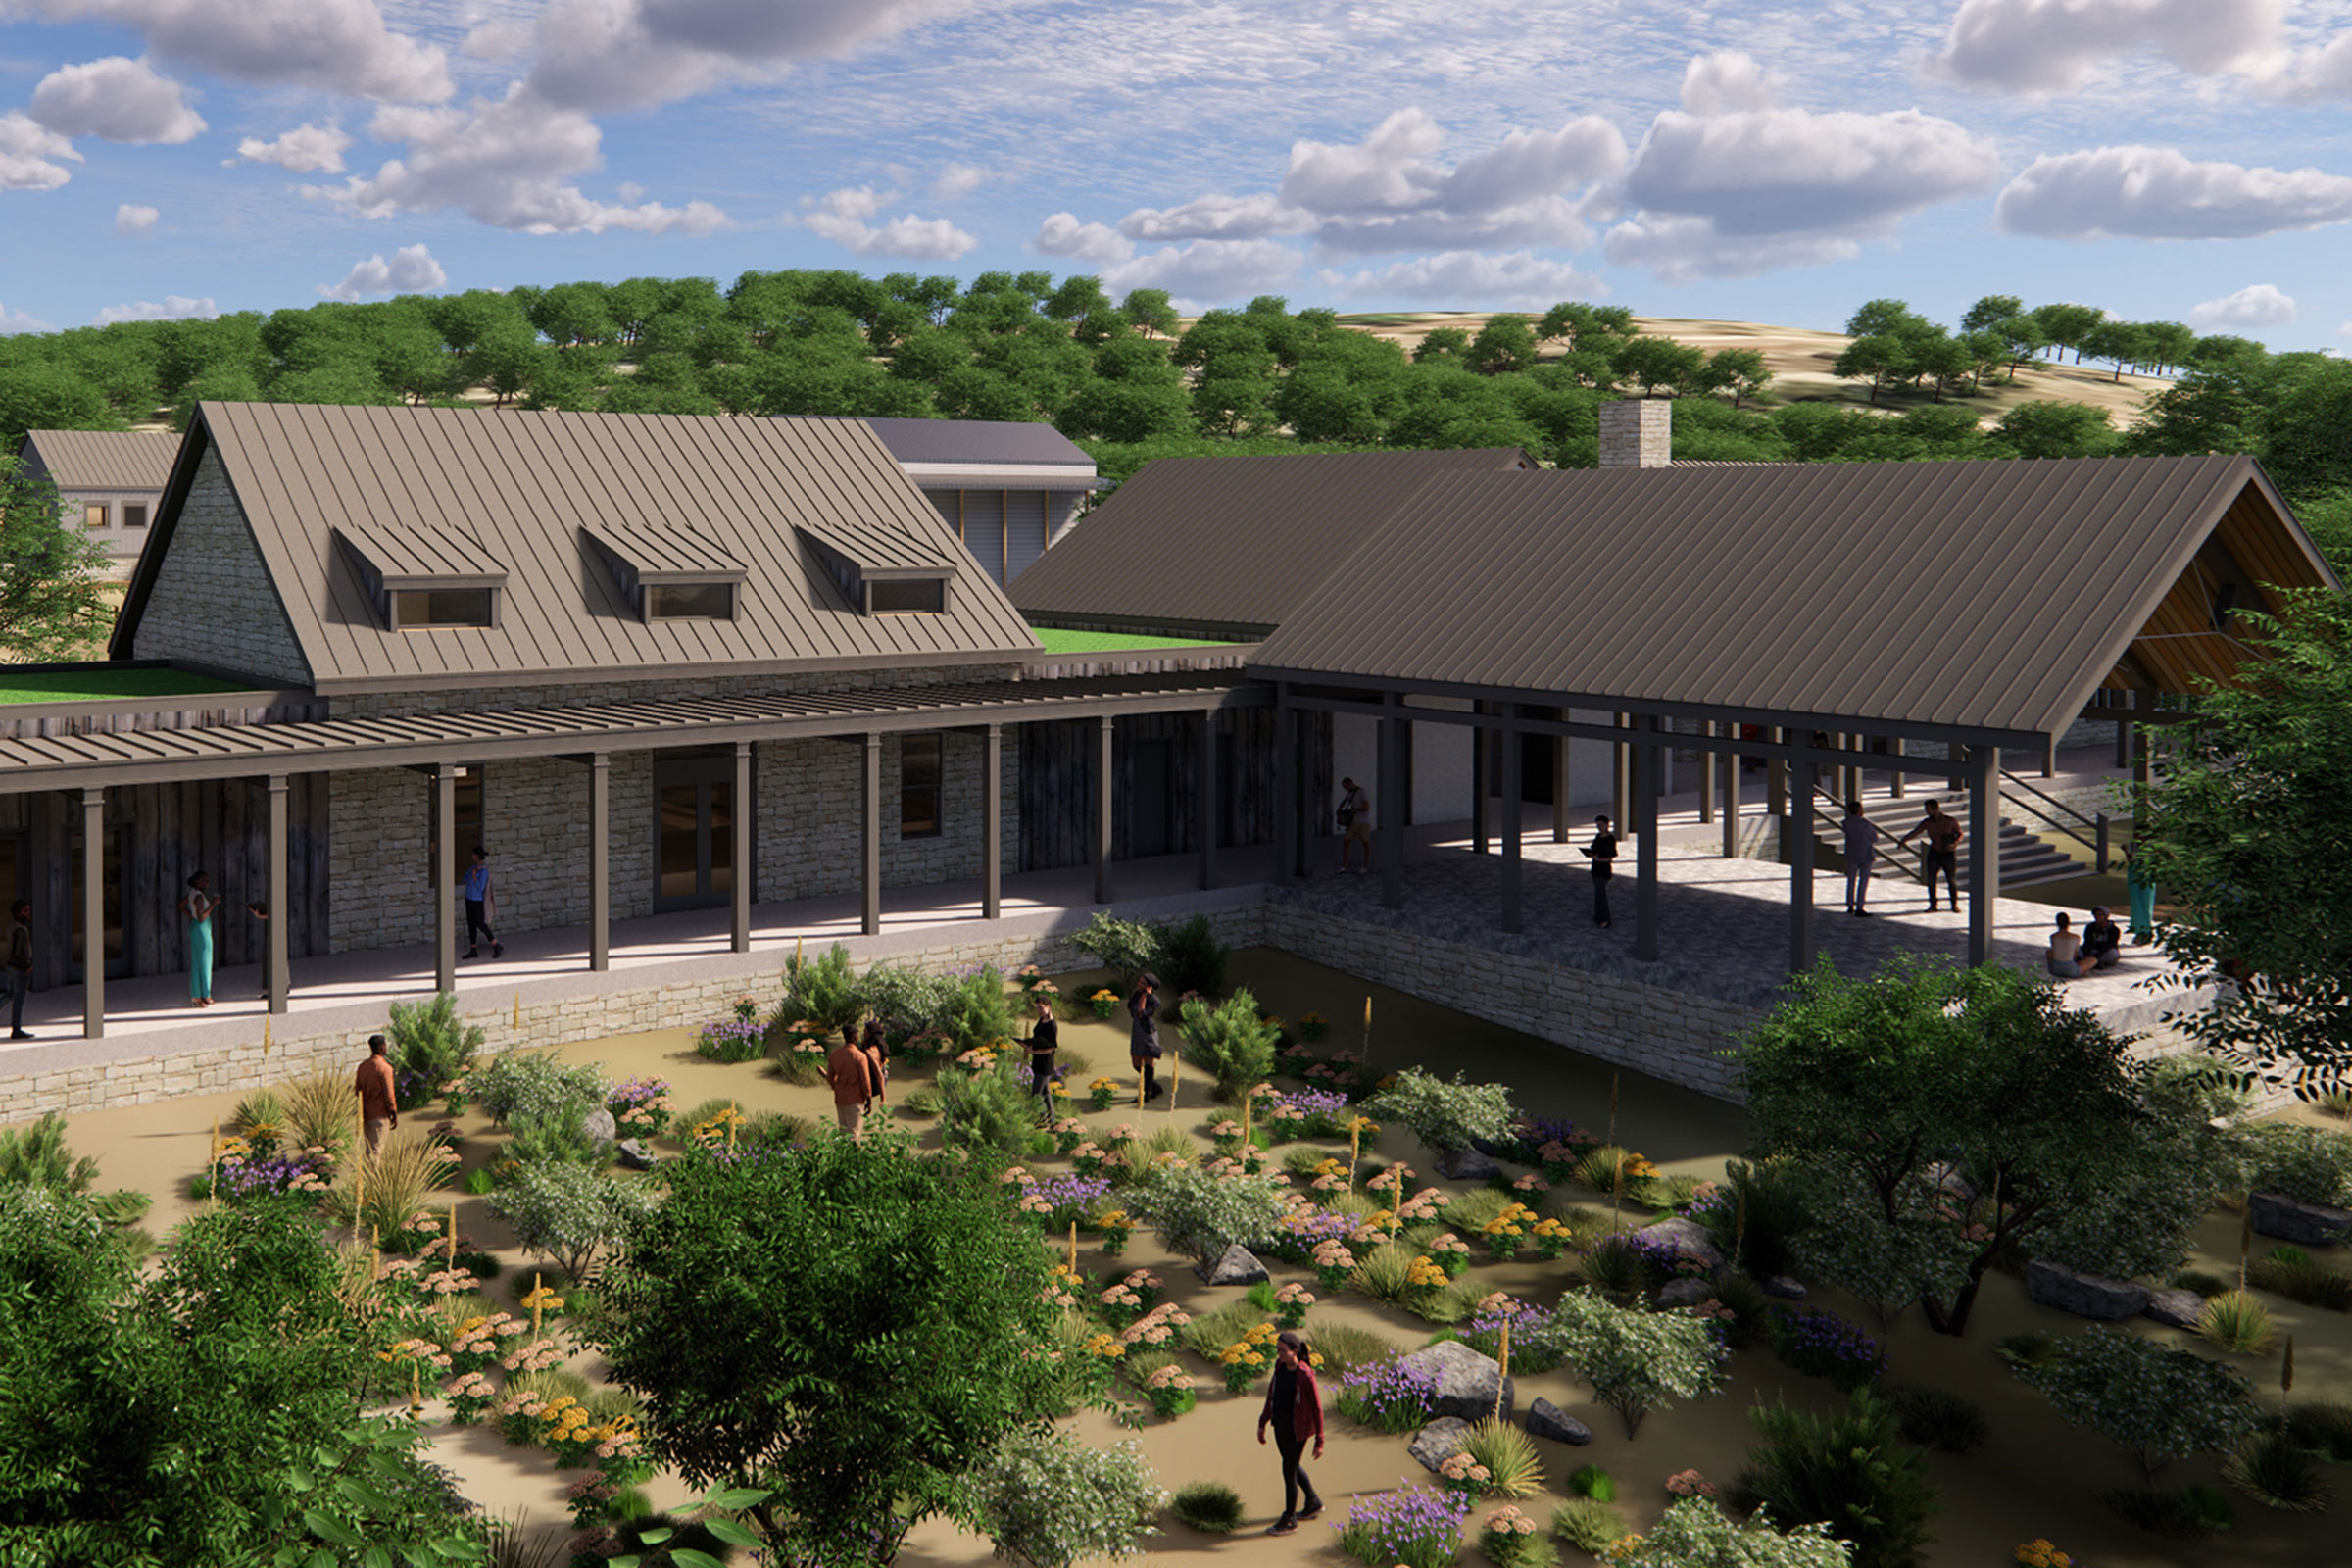 An artist's rendering of a building with open air areas and a pollinator garden in the Texas Hill Country